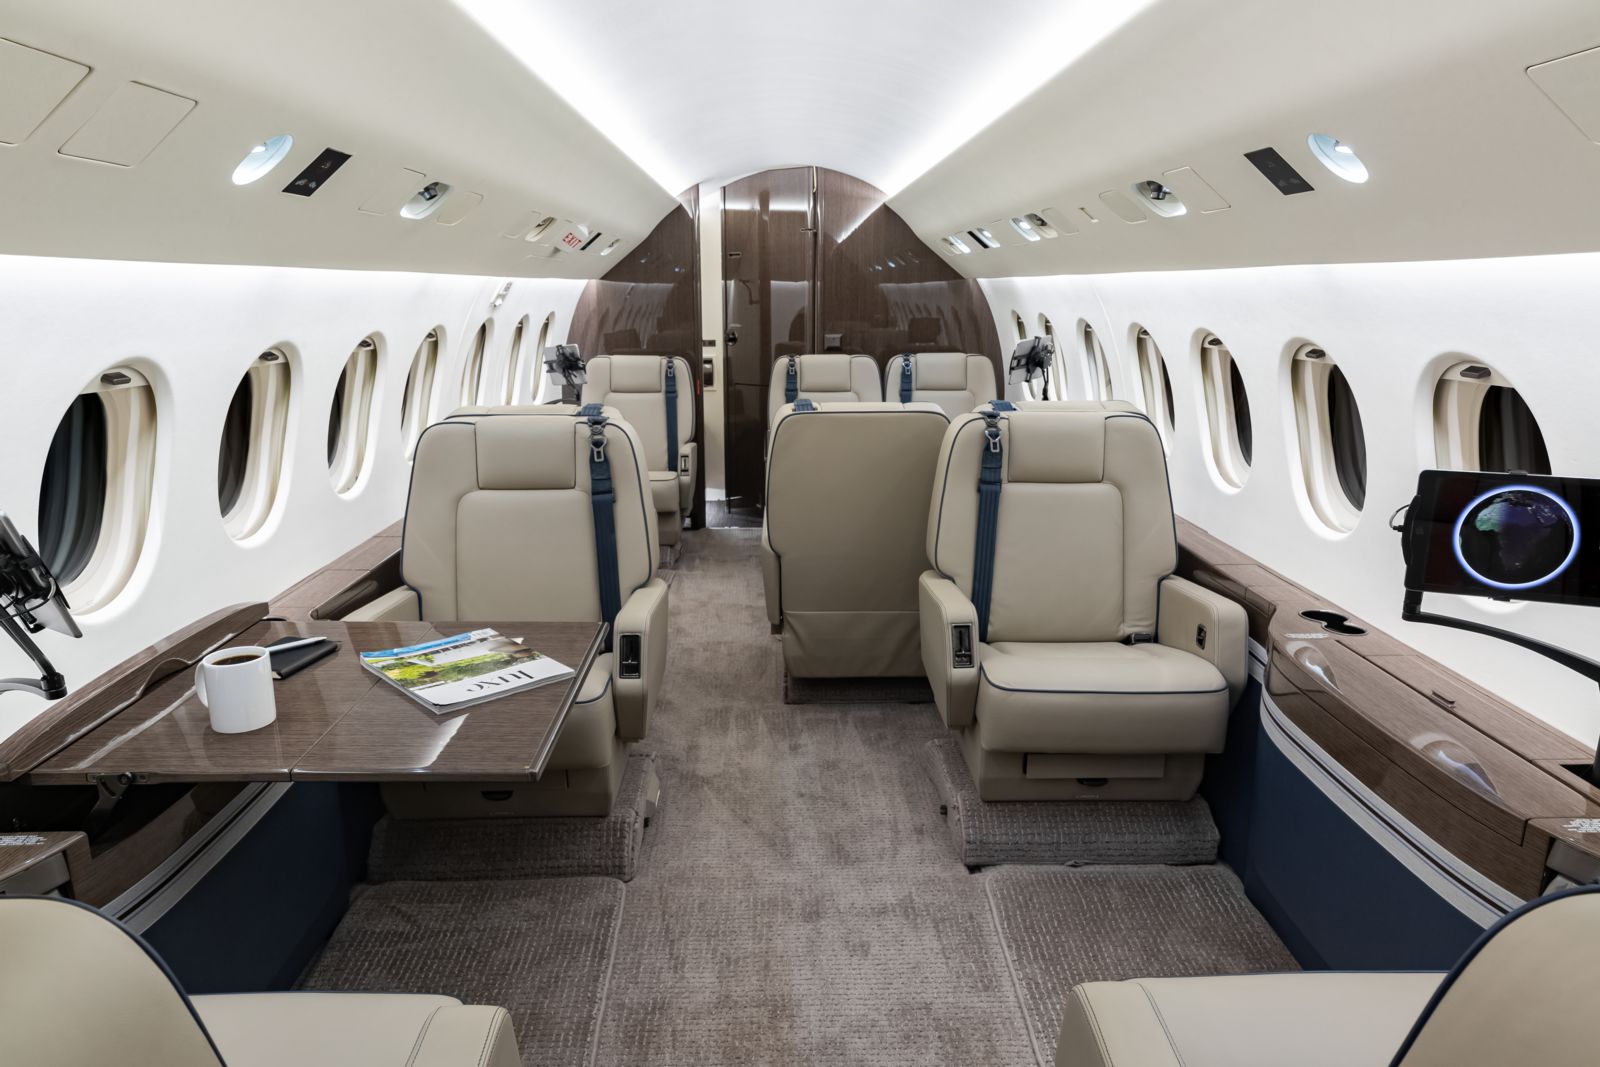 Dassault Falcon 2000  S/N 128 for sale | gallery image: /userfiles/files/bfp_2335.jpg